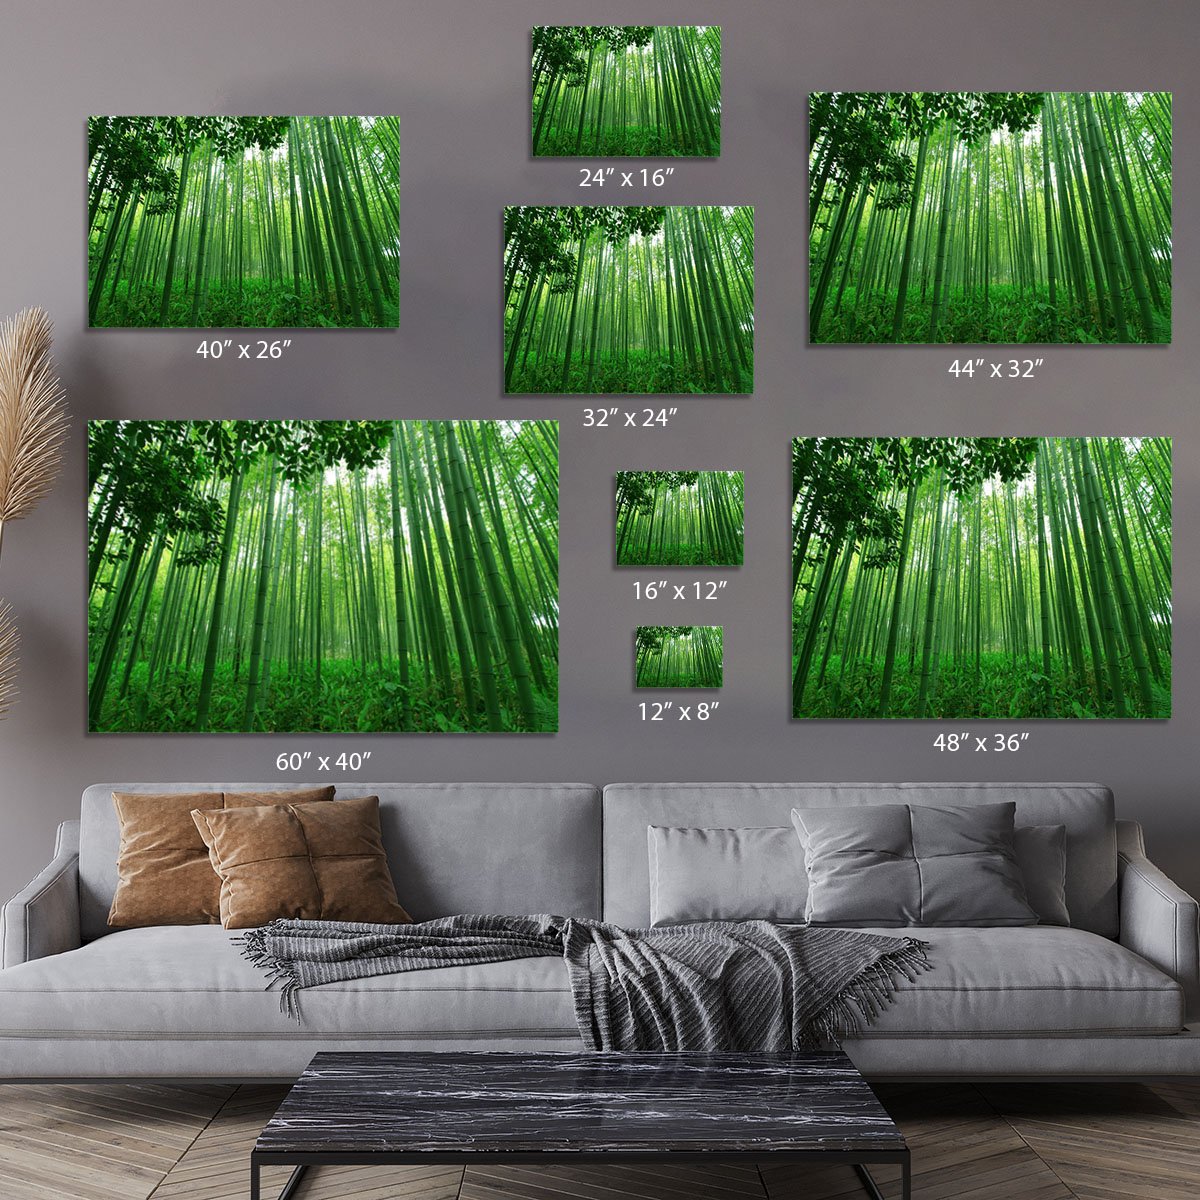 Green bamboo forest Canvas Print or Poster